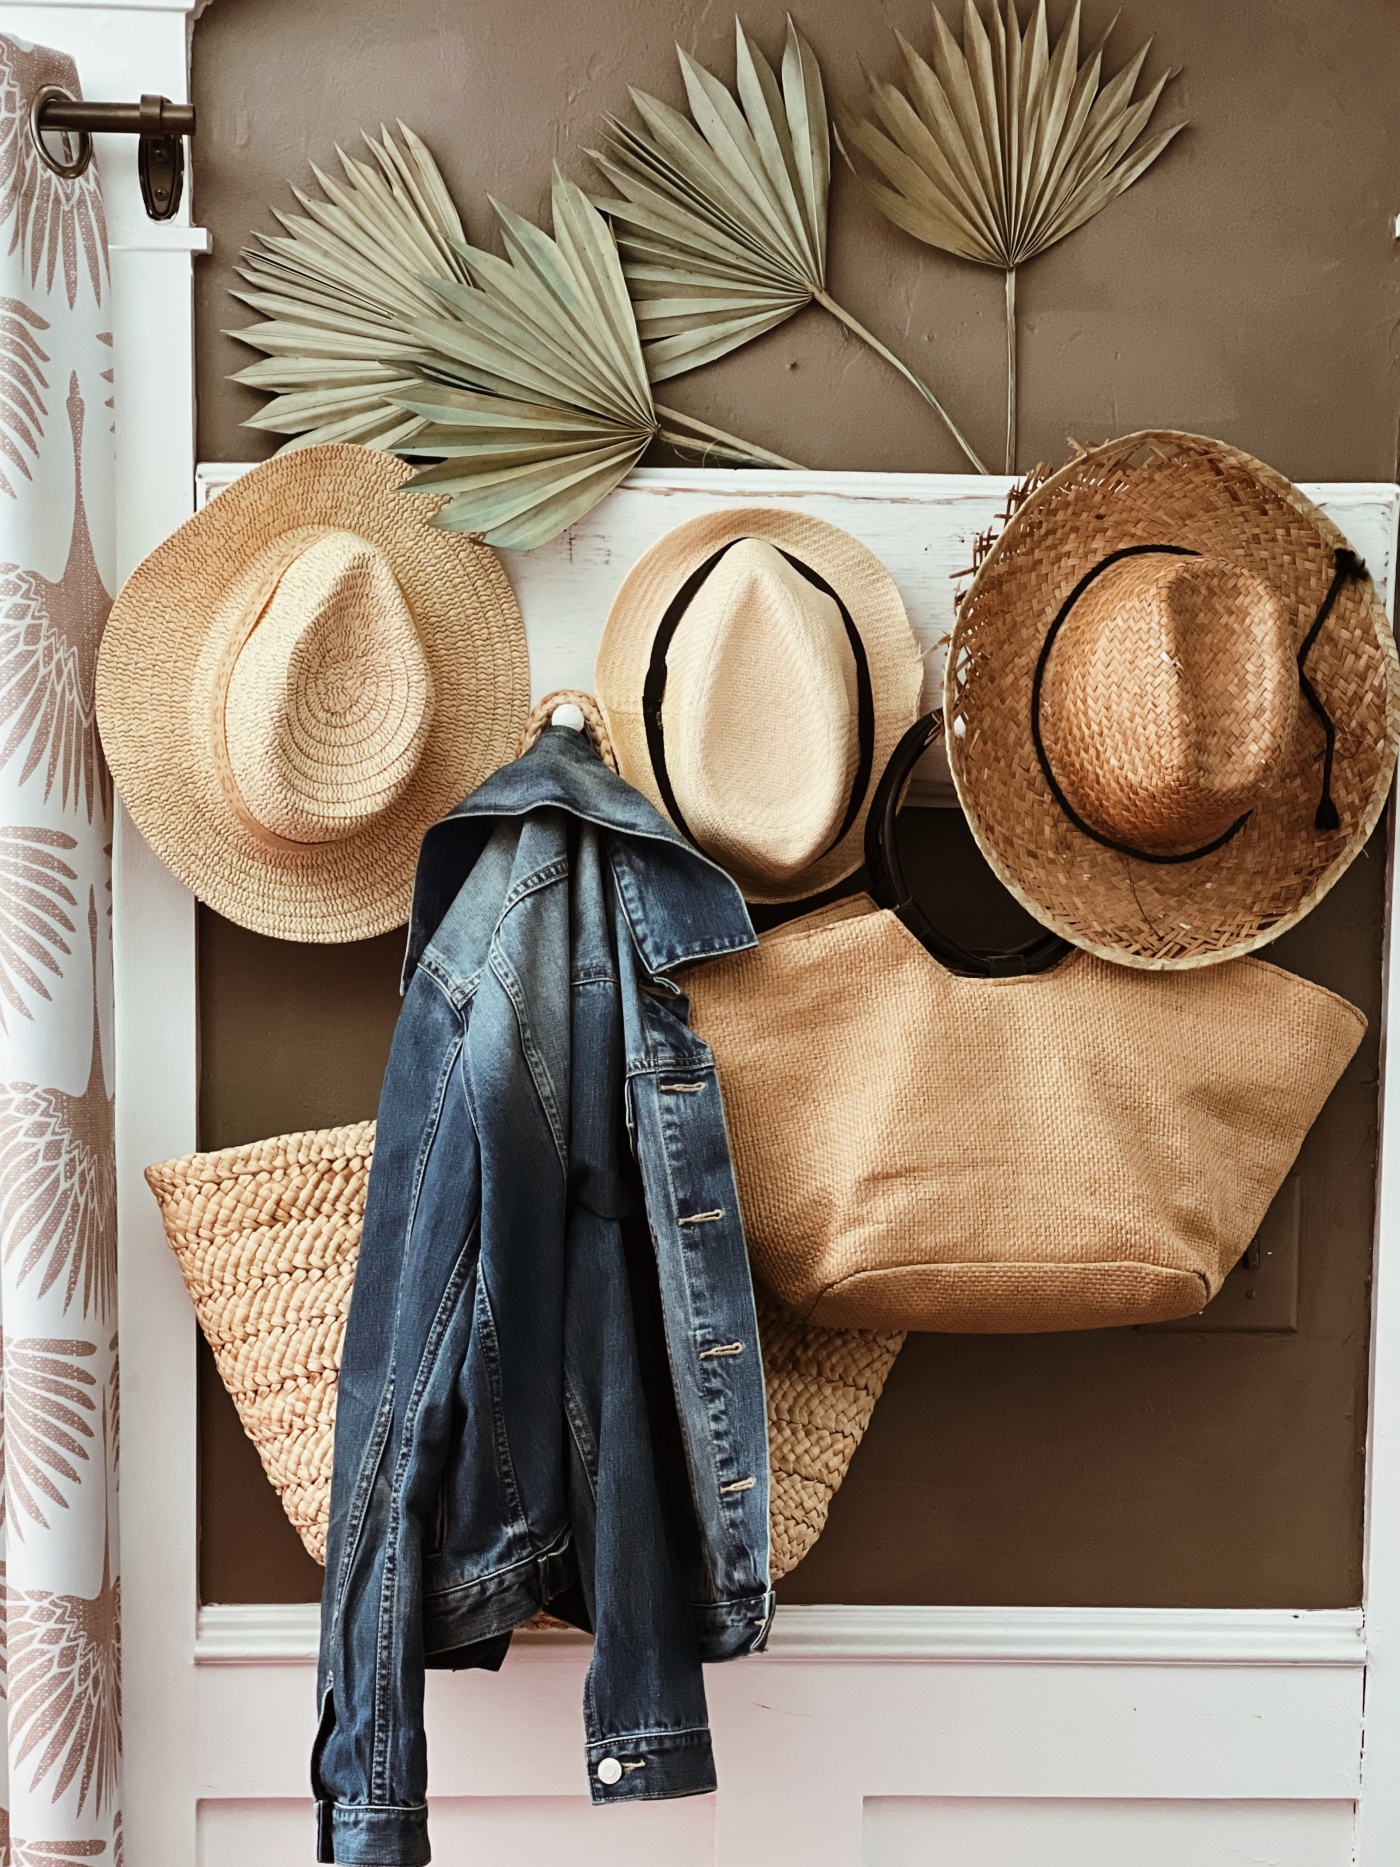 Straw Hats & Straw Bags – Buy, Wear, and Use as Home Decor